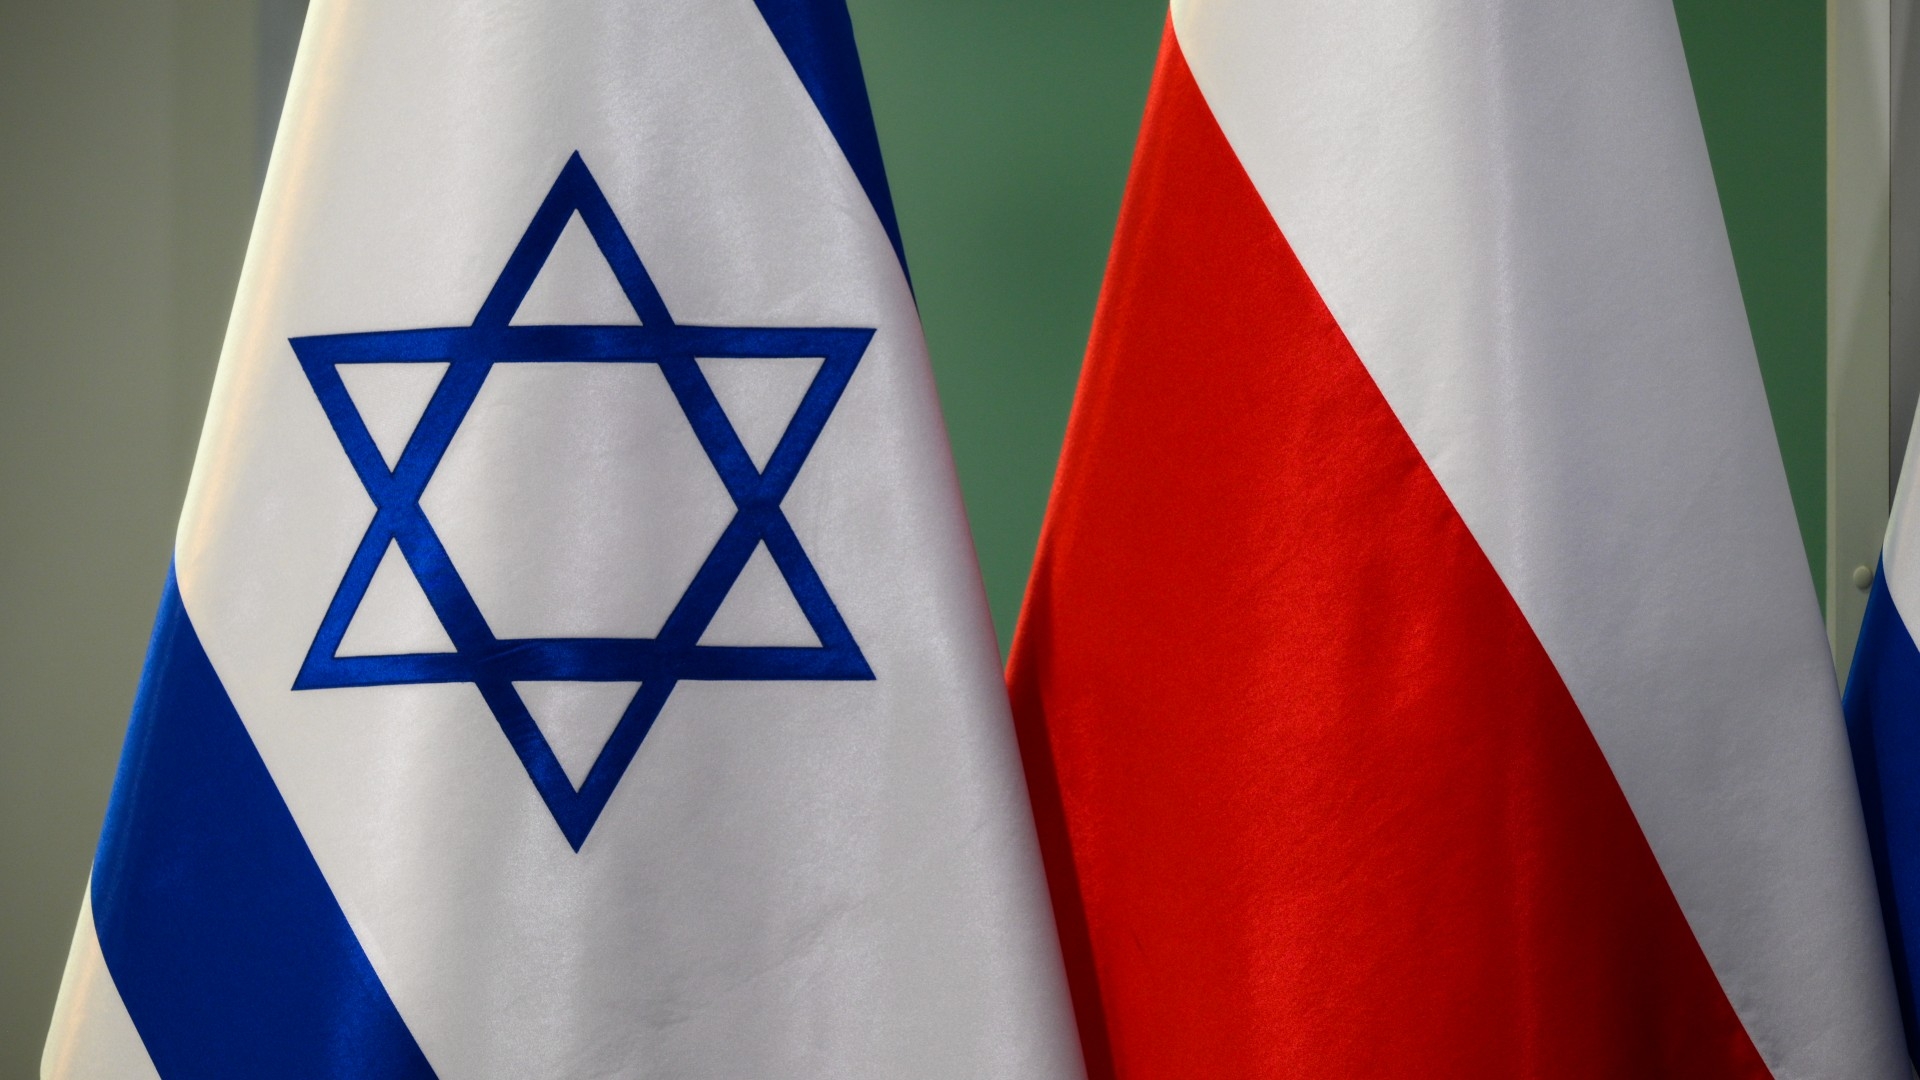 Israeli and Polish flags are seen at the foreign ministry in Warsaw, Poland on 22 March (Reuters)